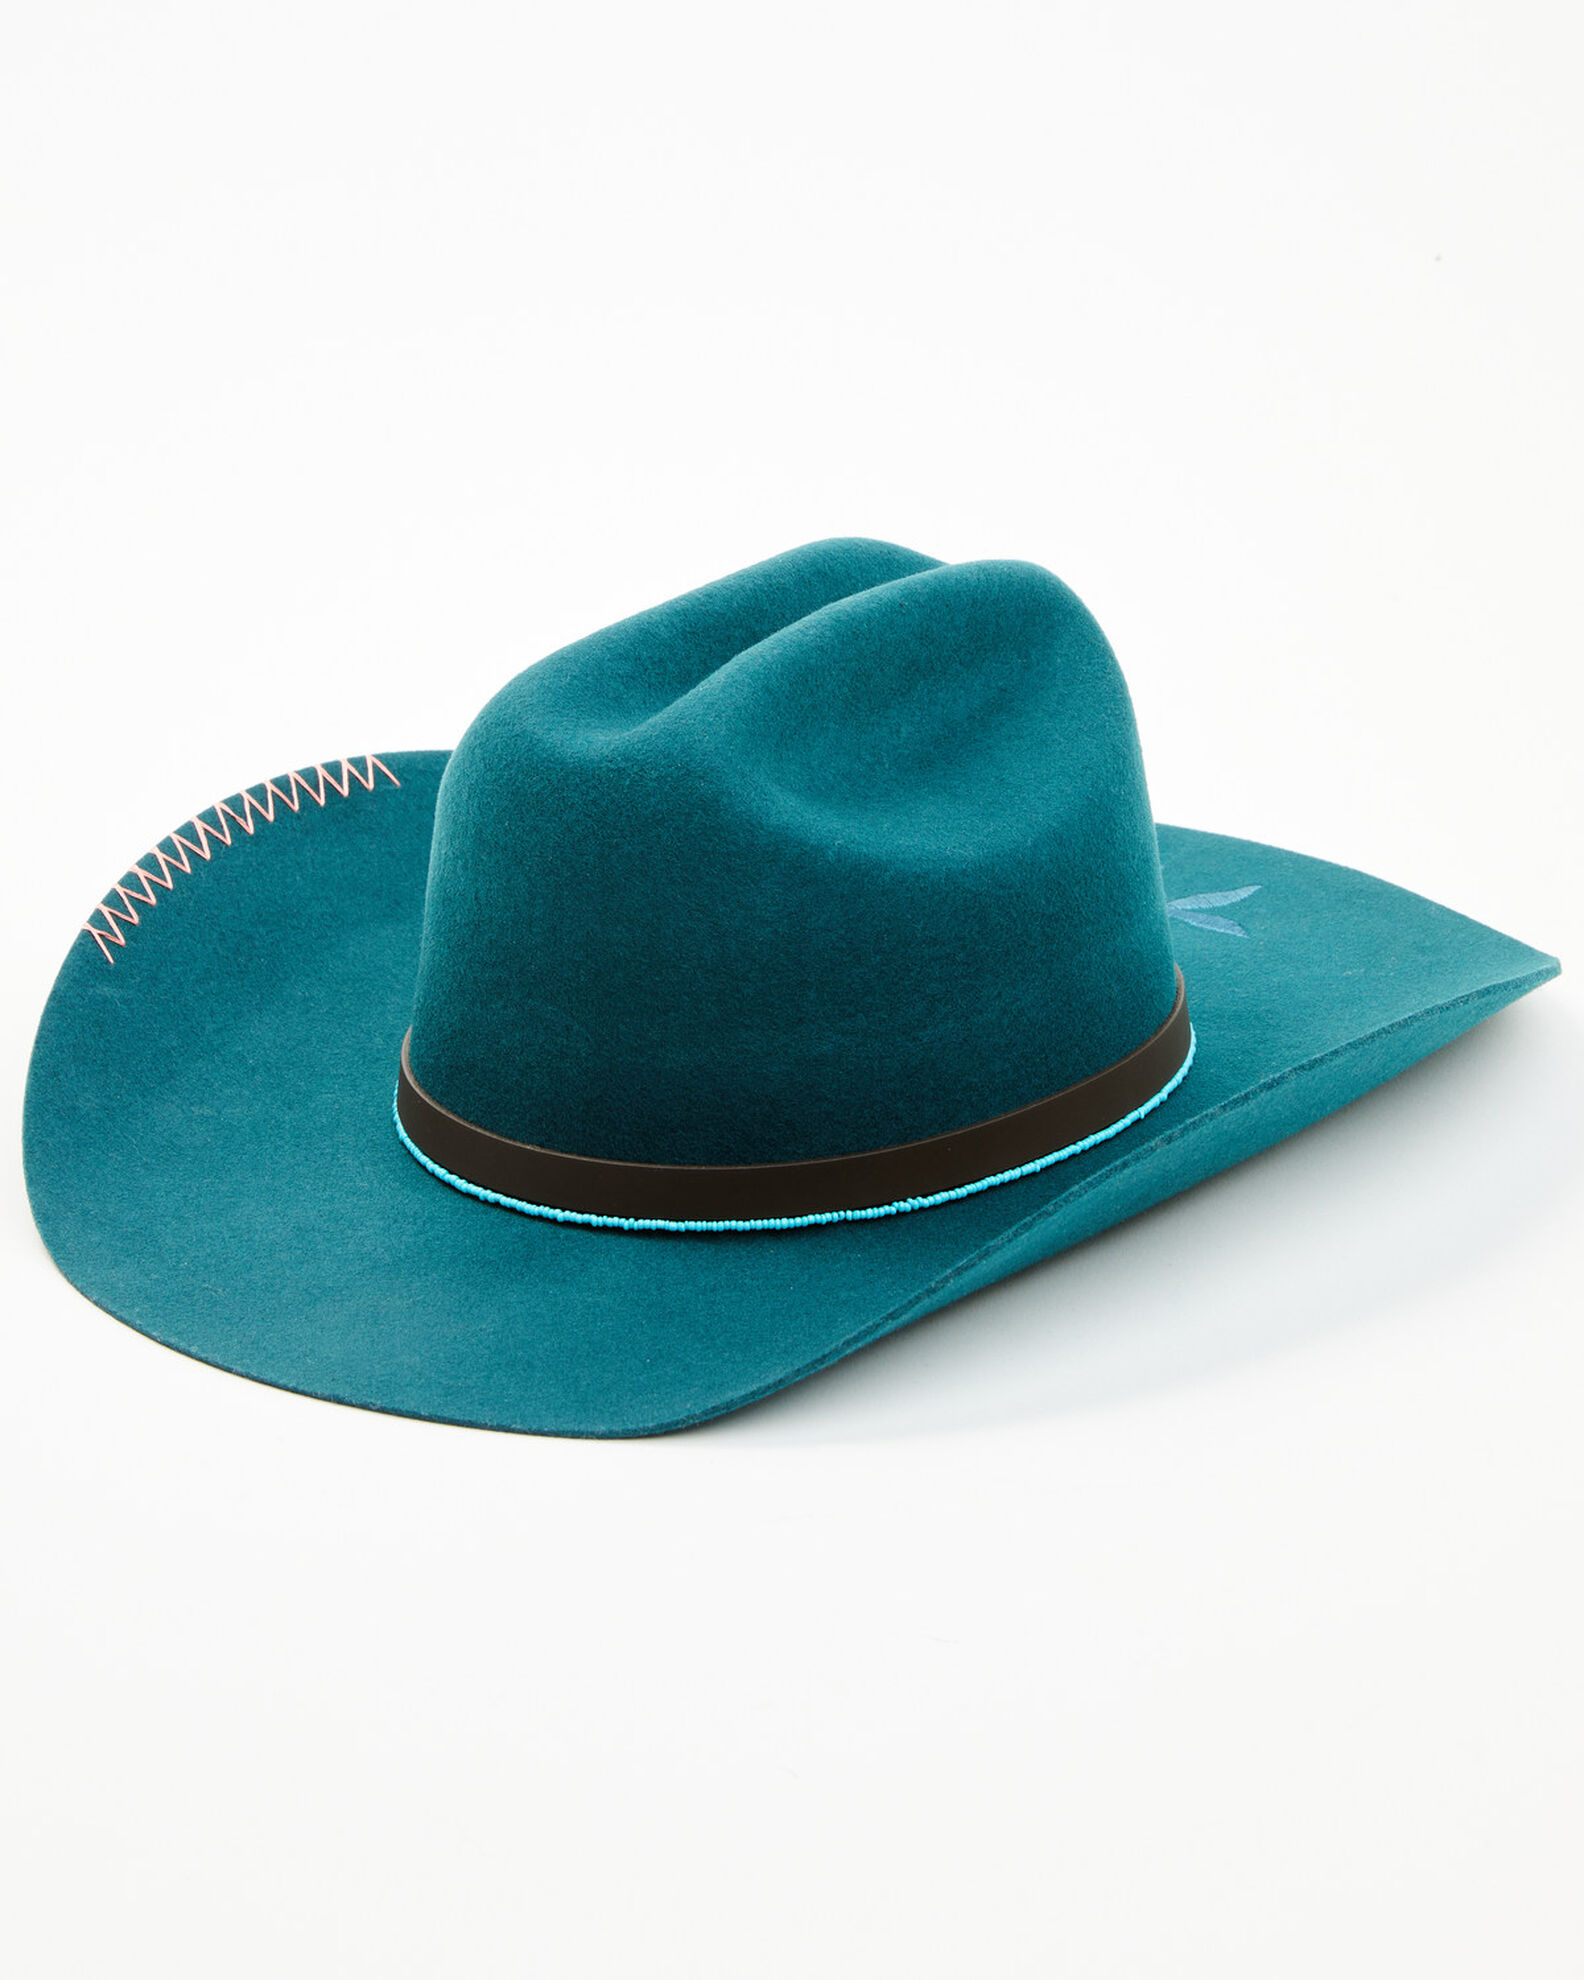 Product Name: Shyanne Women's Mabel Embroidered Felt Cowboy Hat